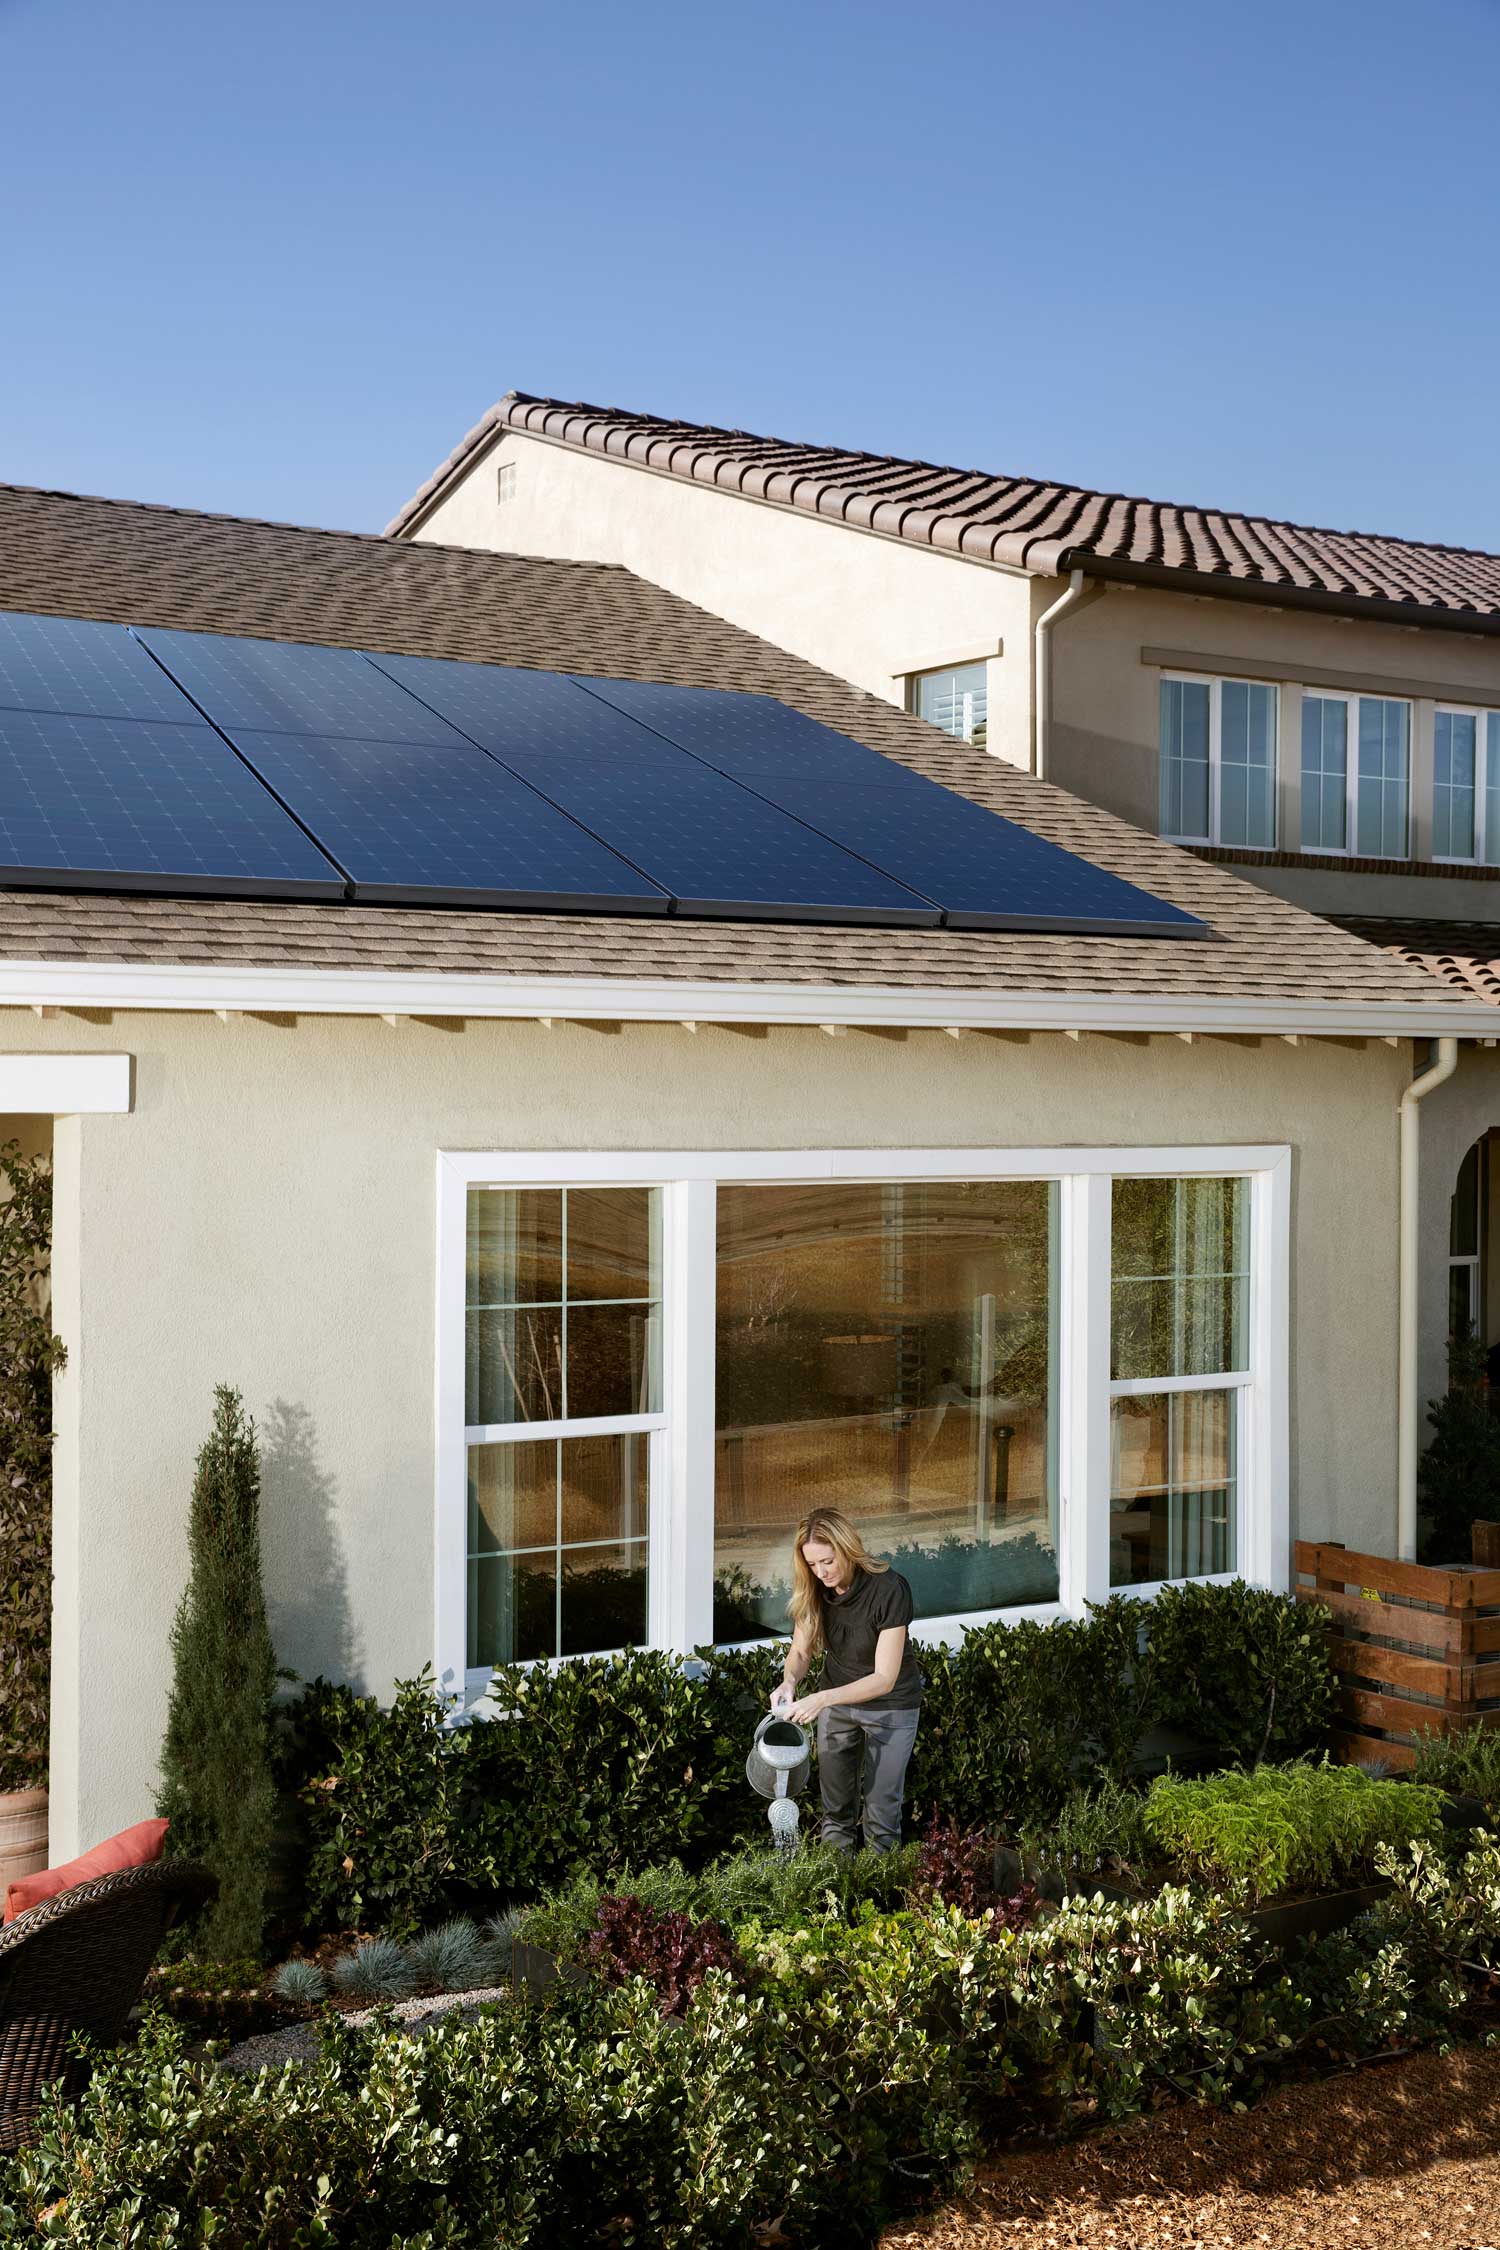 SunPower by Custom Energy is the best company for solar savings in St. George.